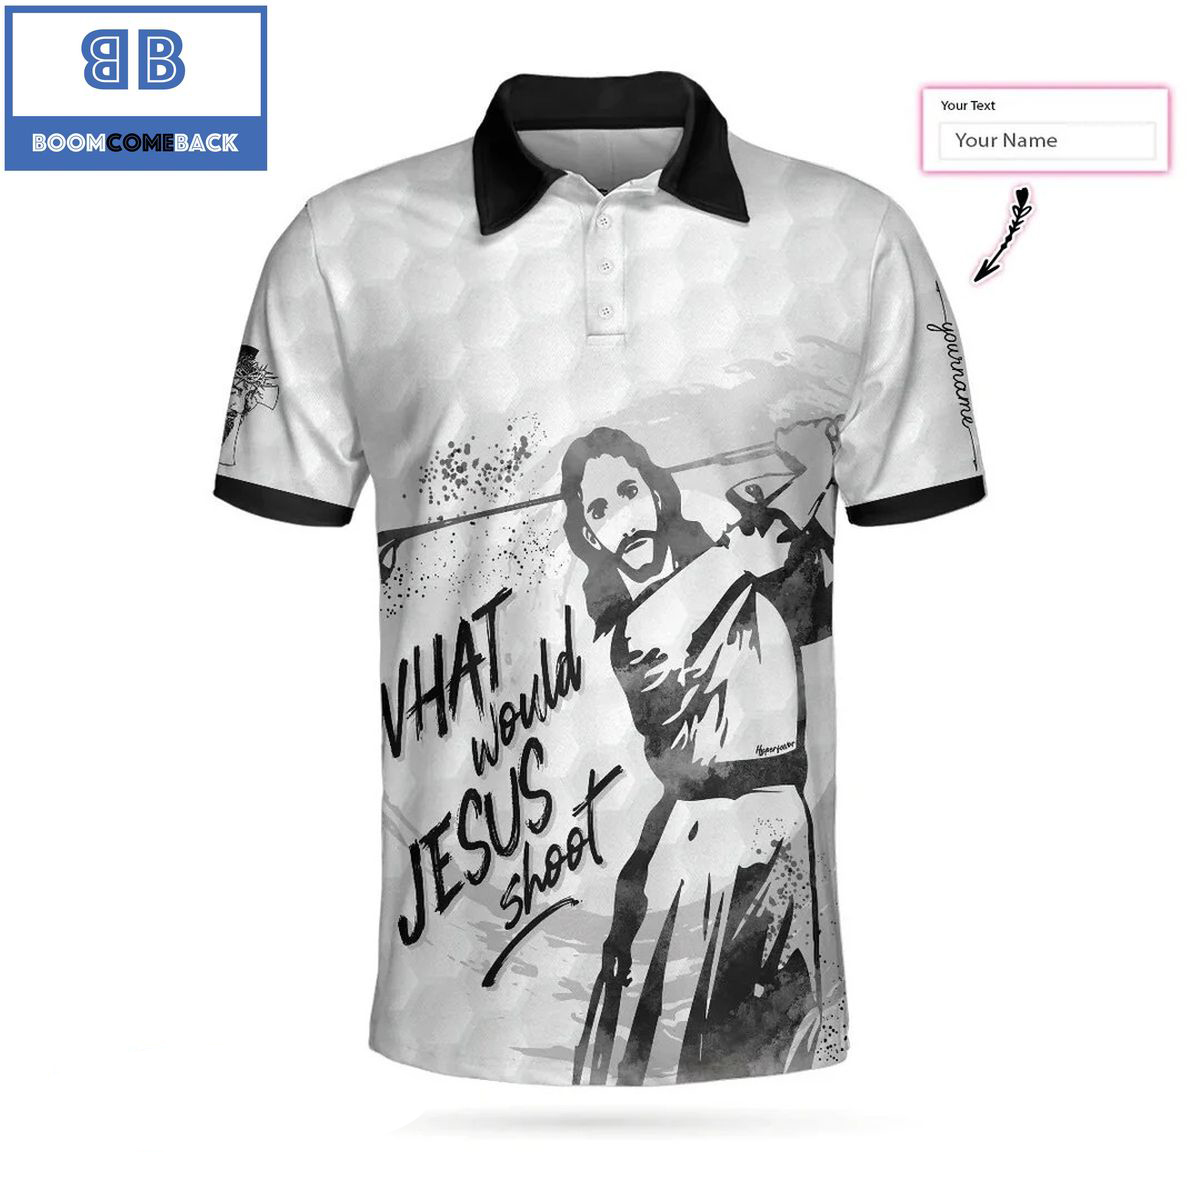 Personalized2BWhat2BWould2BJesus2BShoot2BAthletic2BCollared2BMens2BPolo2BShirt2B1 02G8R